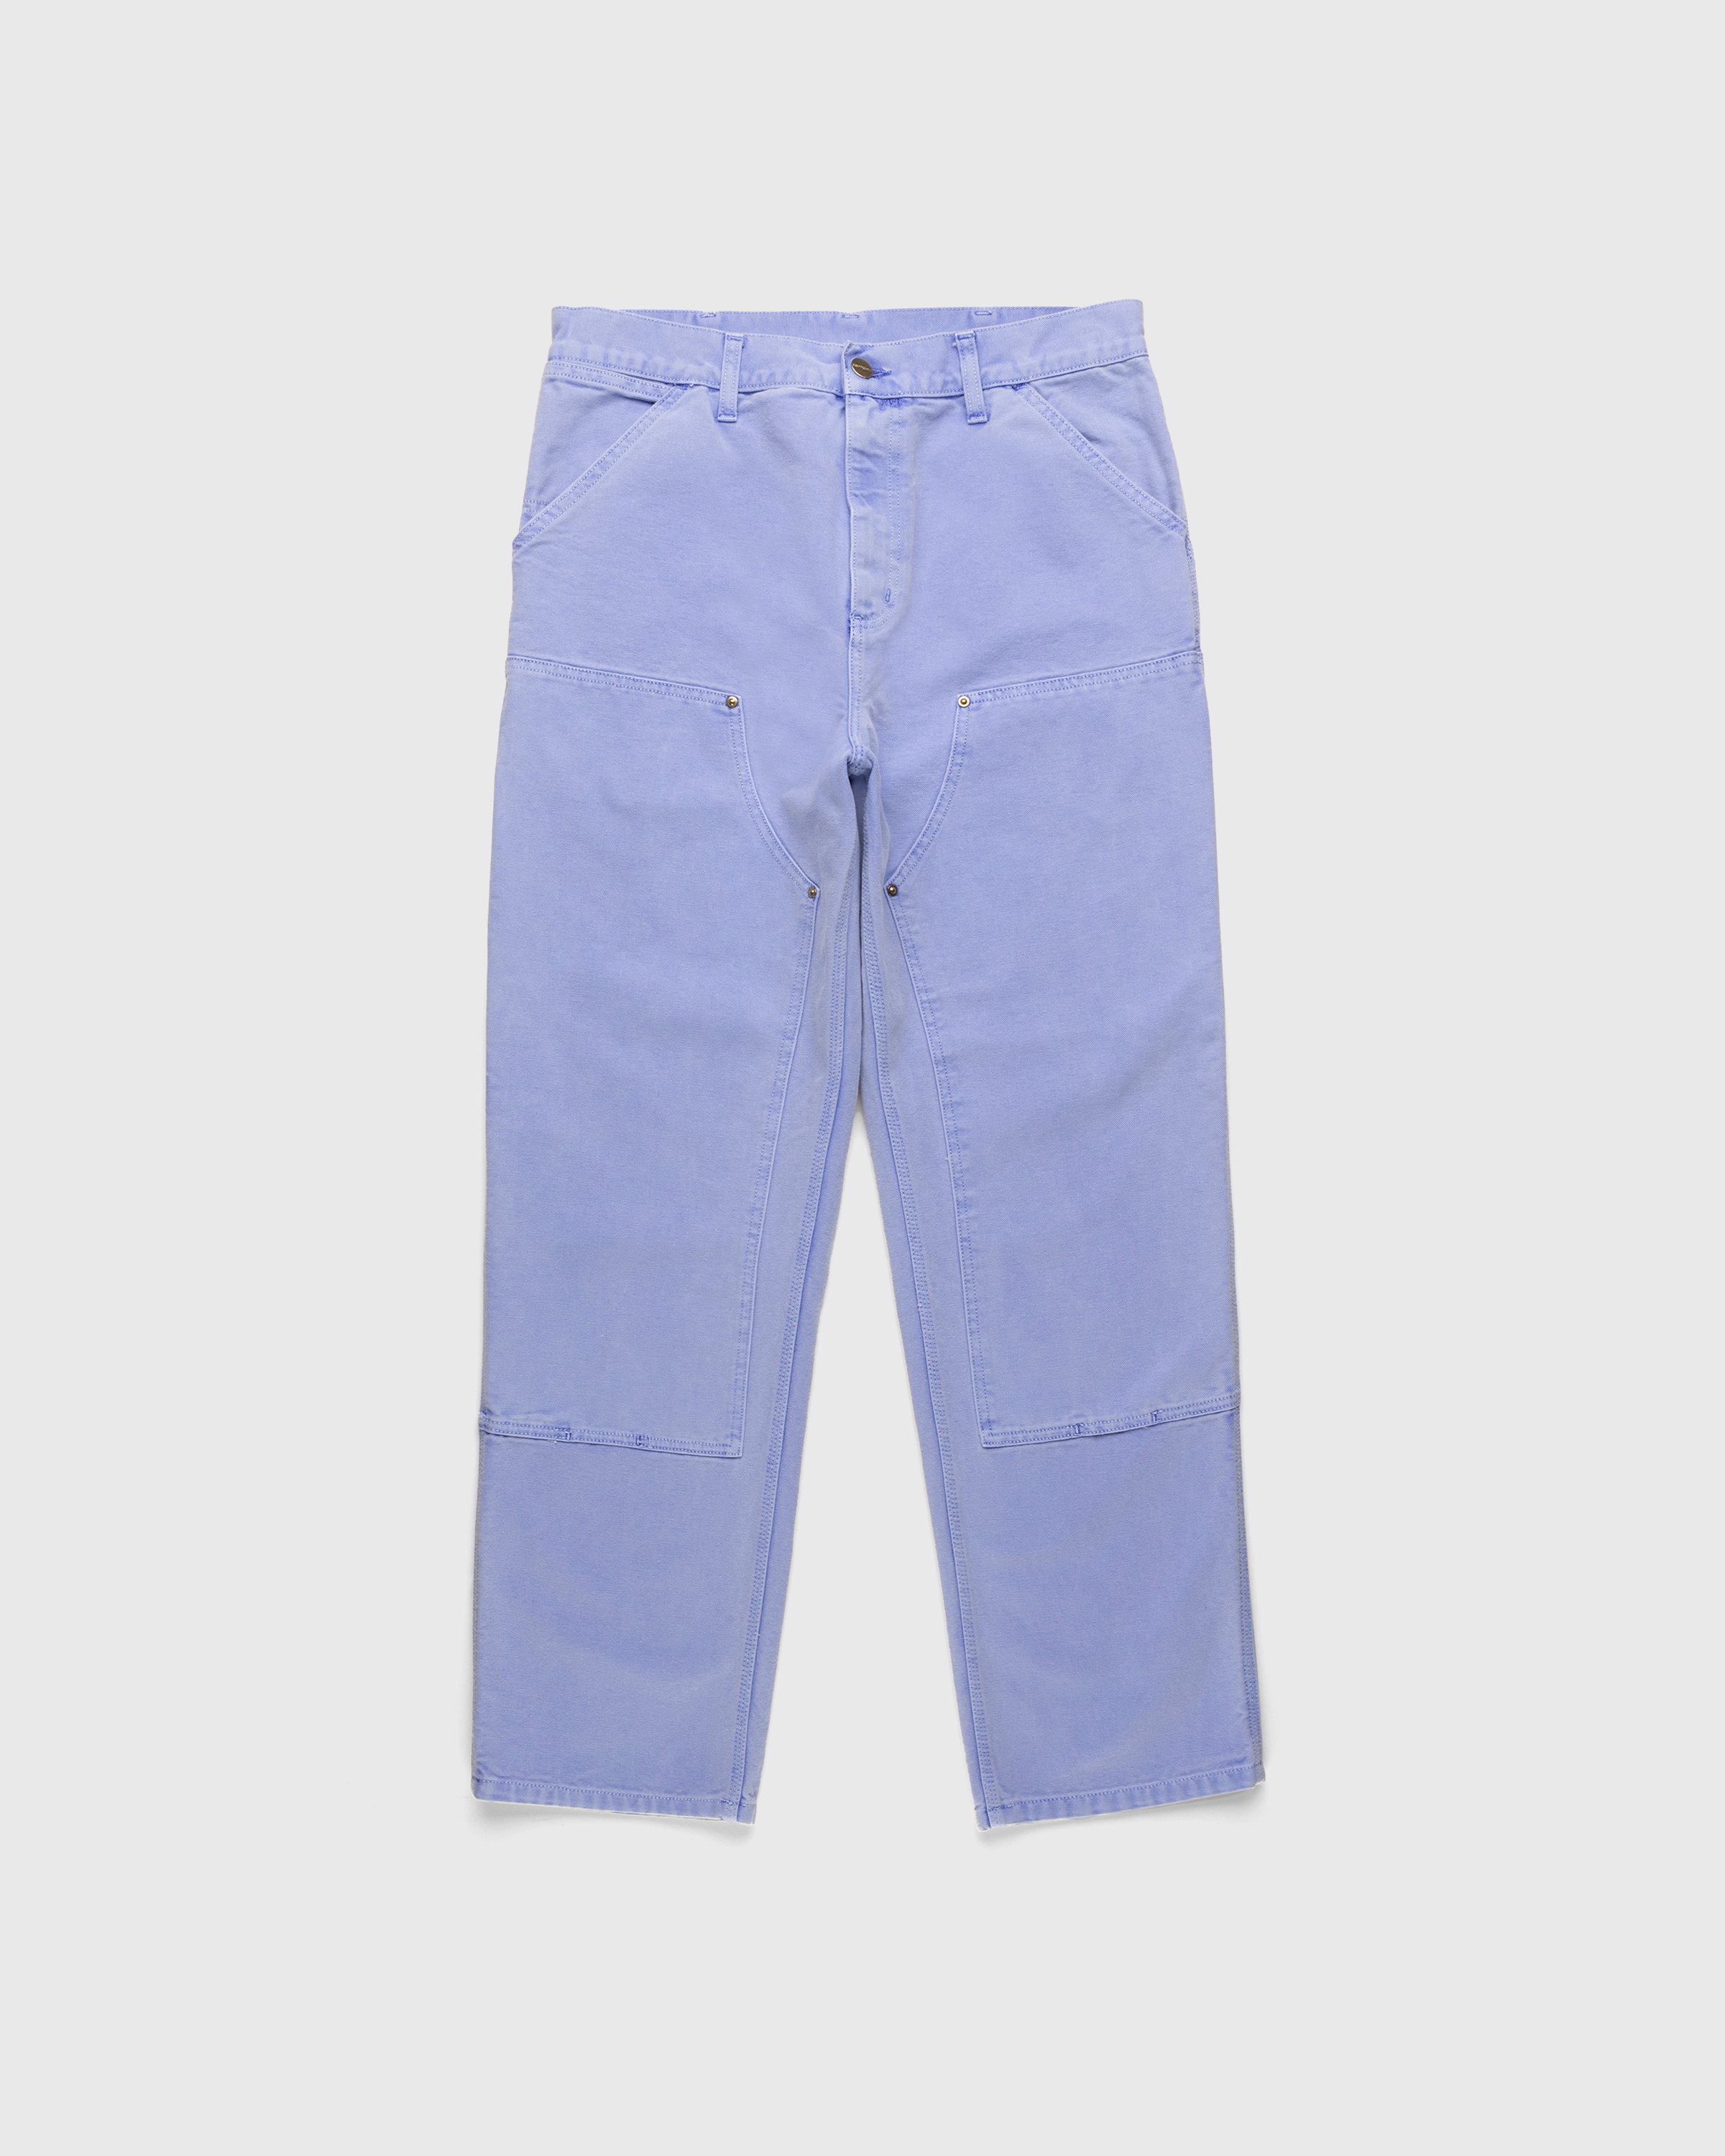 Carhartt WIP - Double Knee Pant Icy Water Faded - Clothing - Blue - Image 1